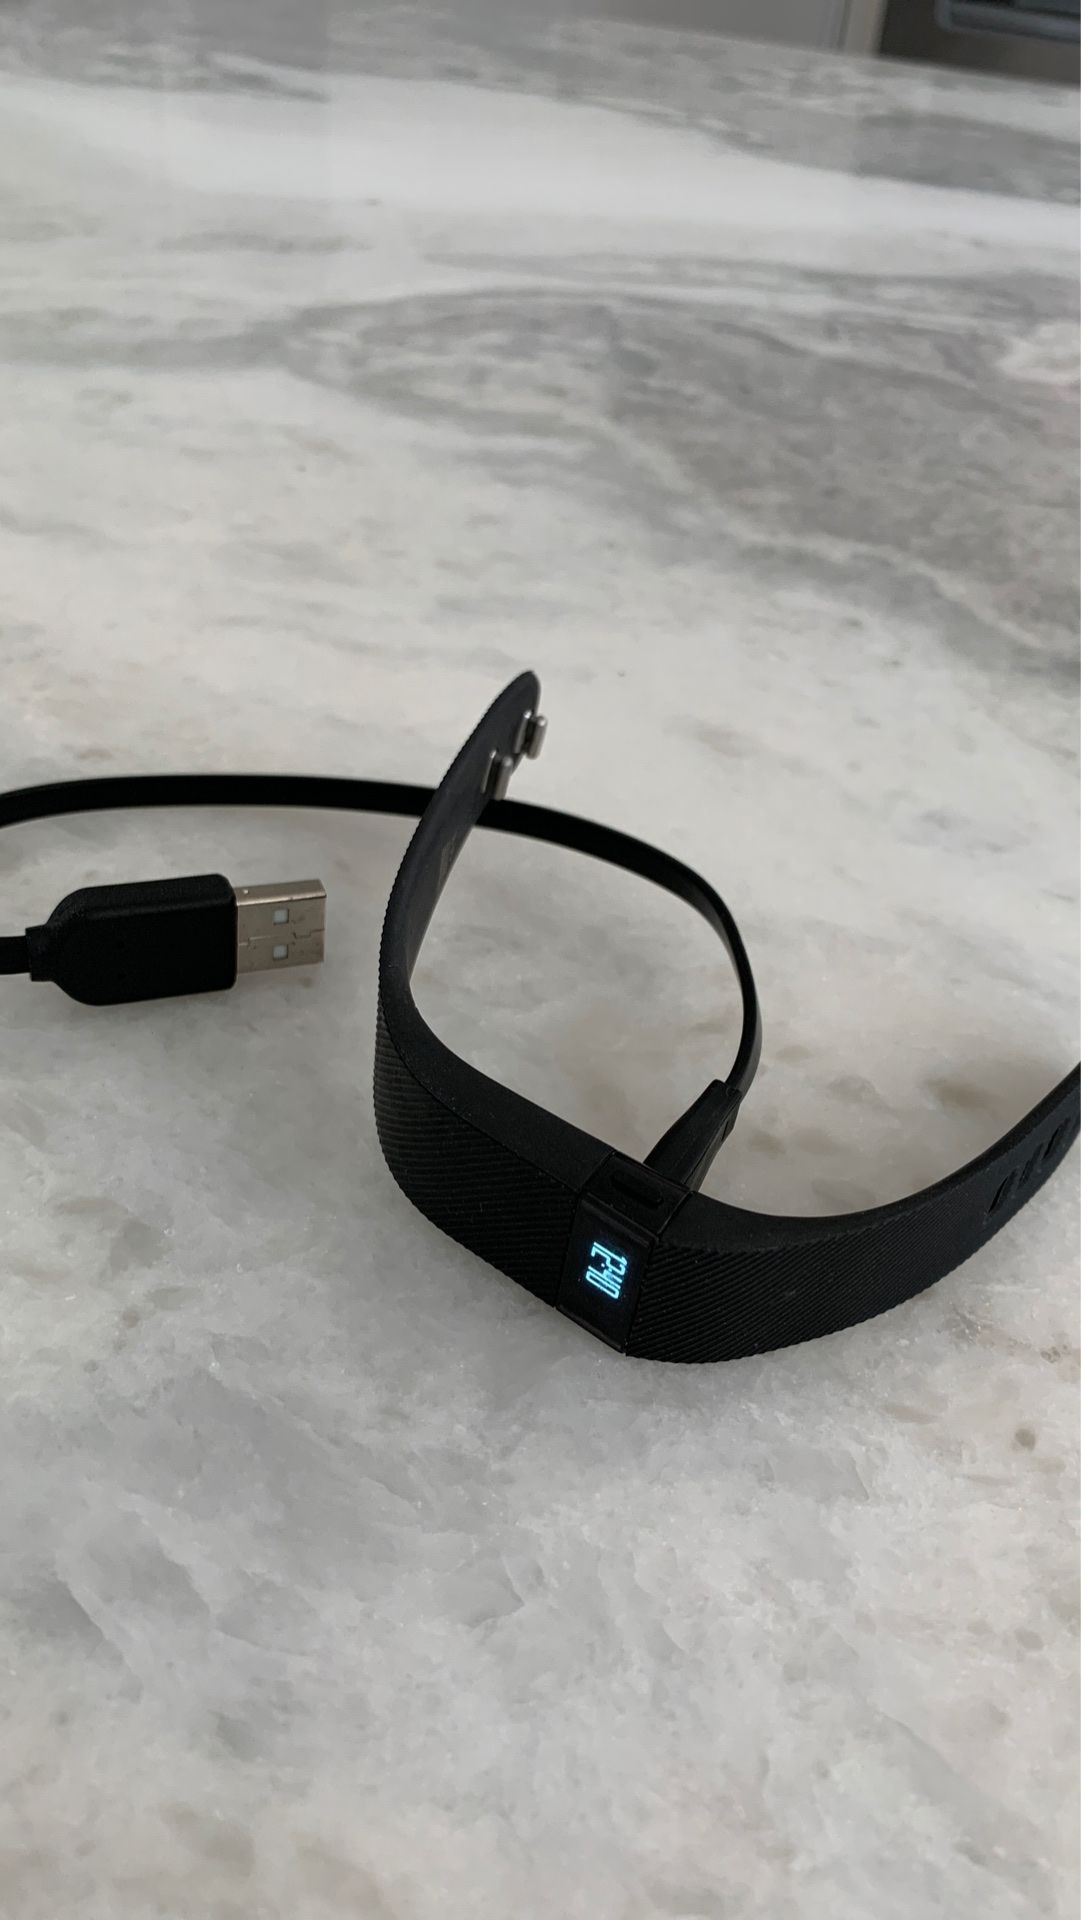 Fitbit with charging cable